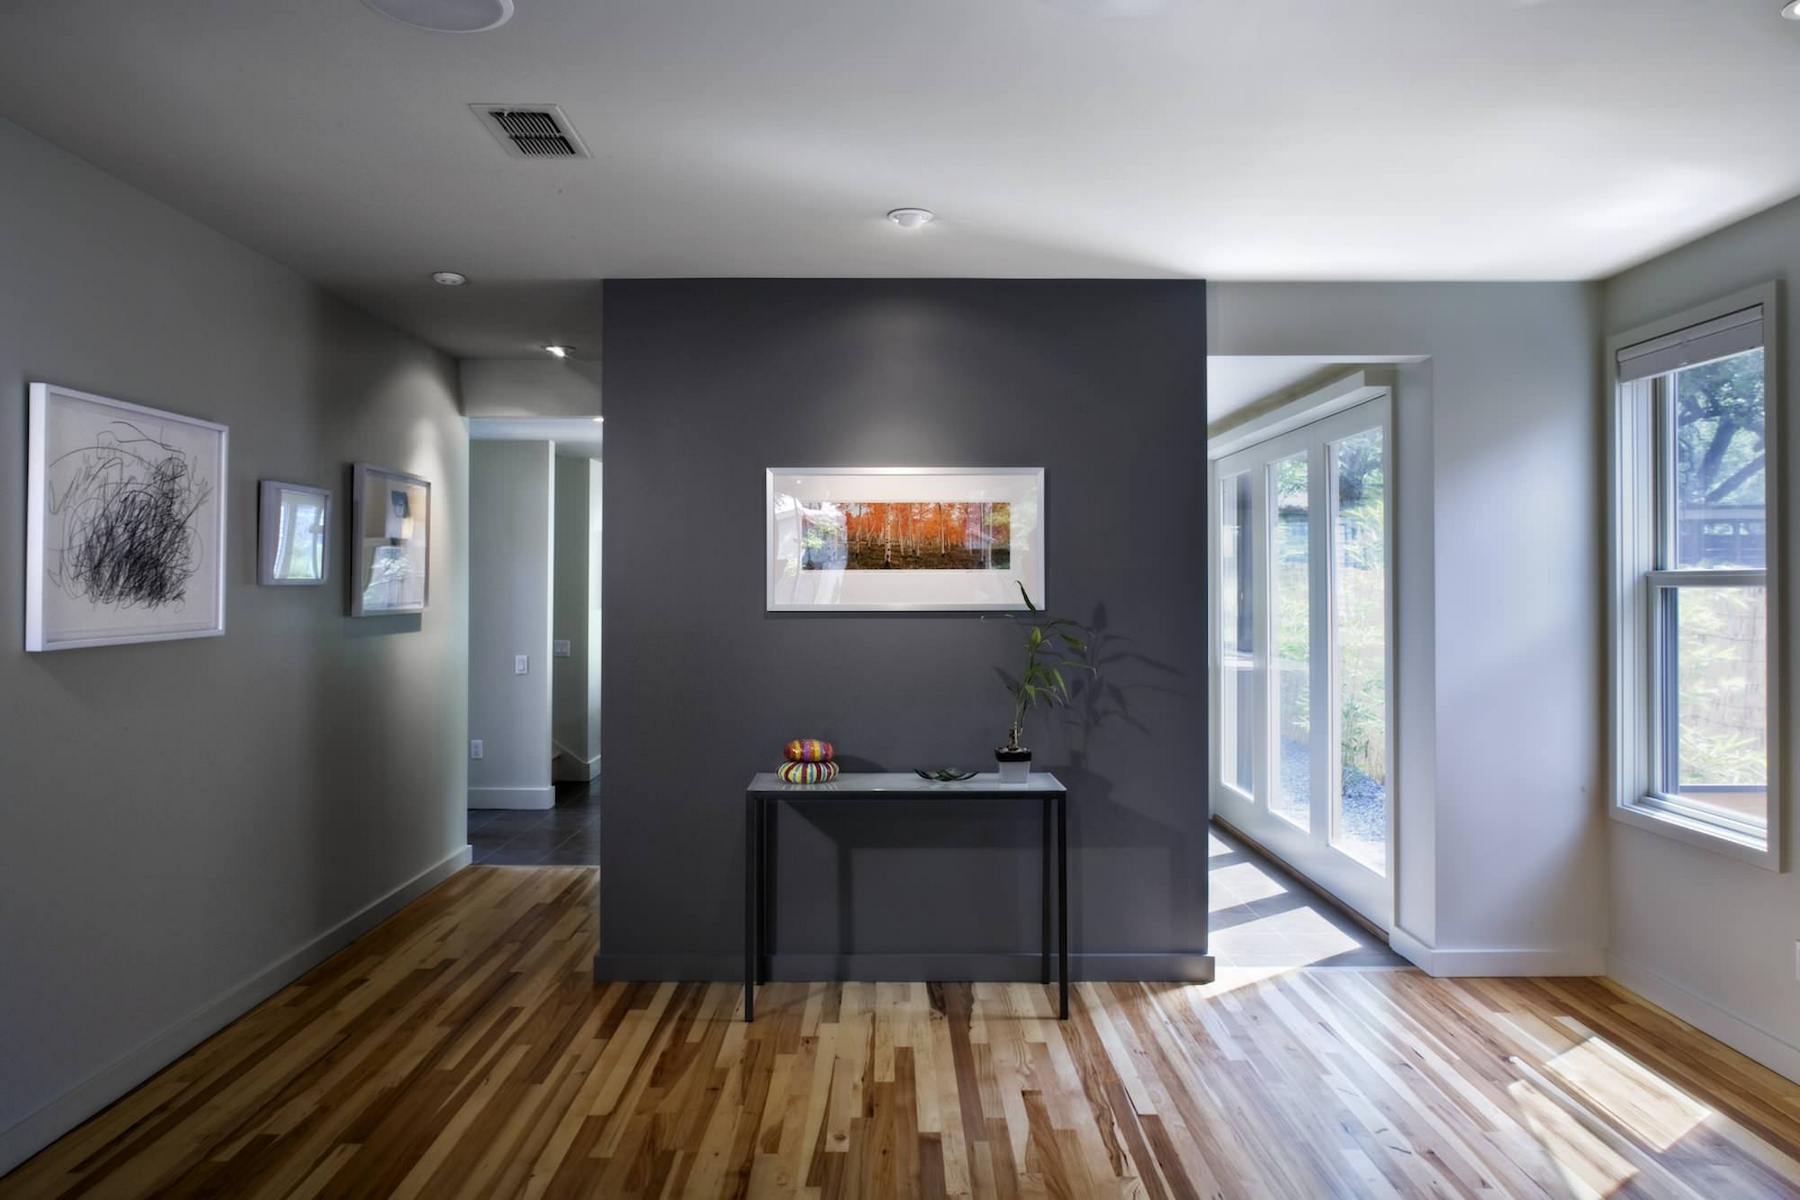 Dark Walls In The Interior Pros And Cons Dark Walls In The